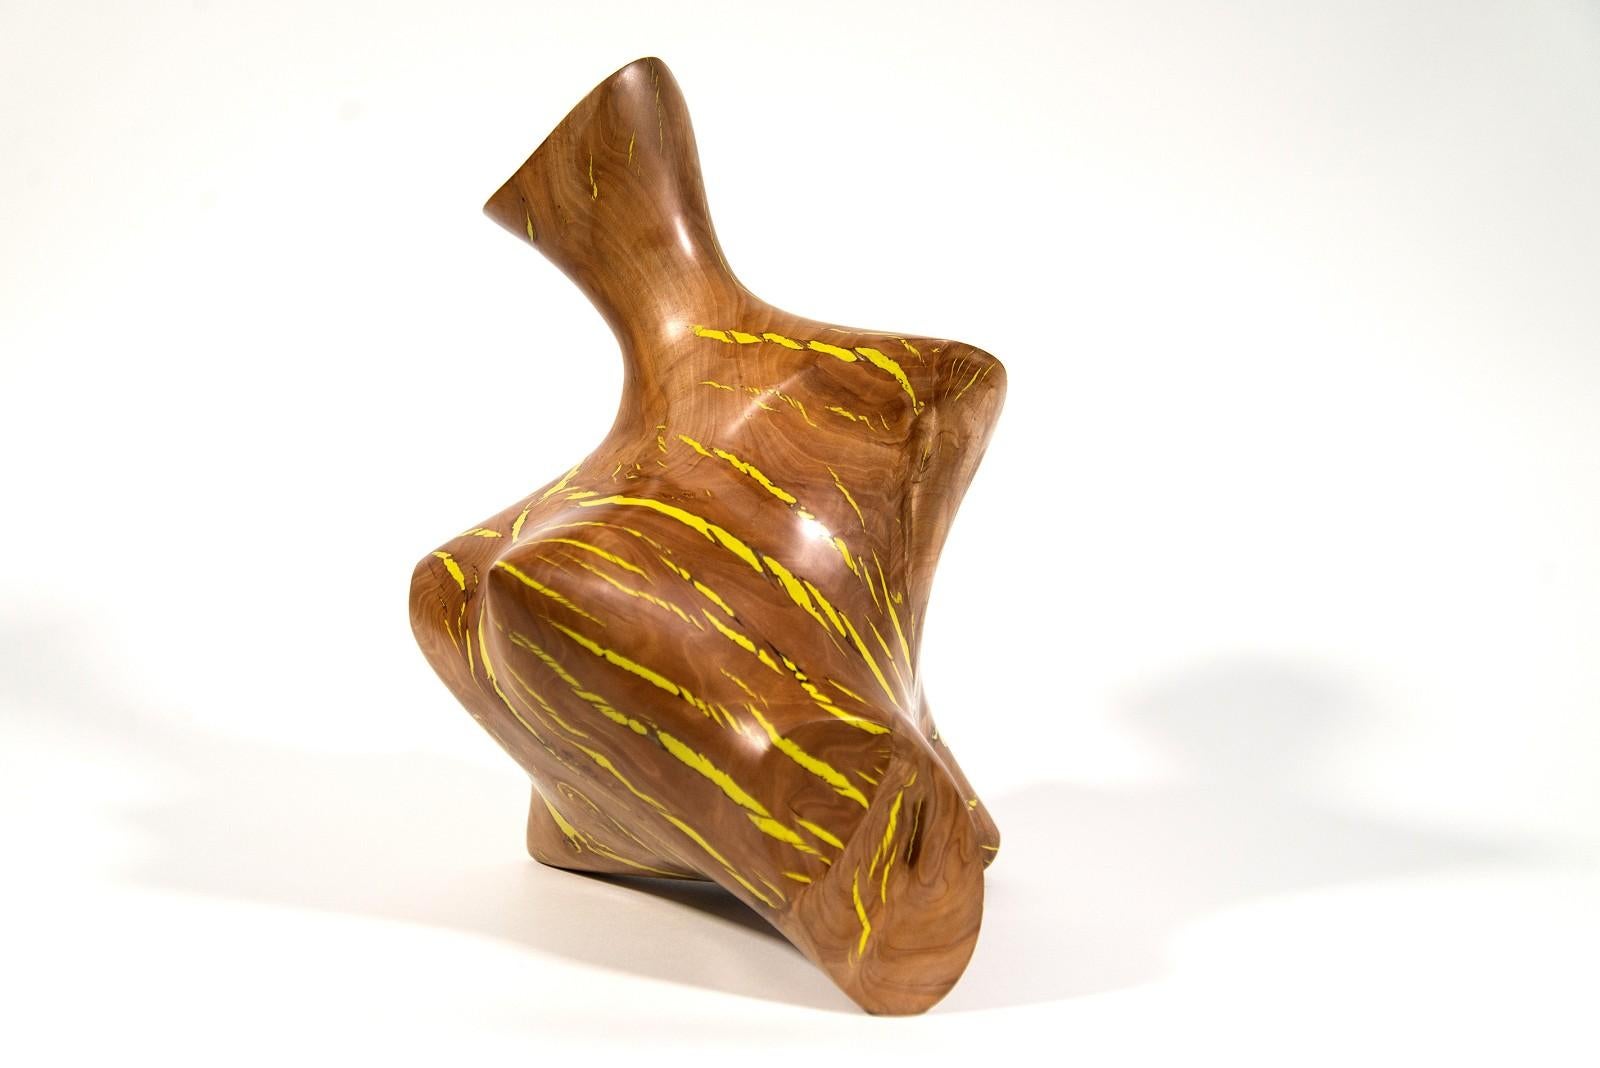 Windfall Series II No 1 - smooth, carved, abstract, Applewood & resin sculpture - Contemporary Sculpture by Shayne Dark